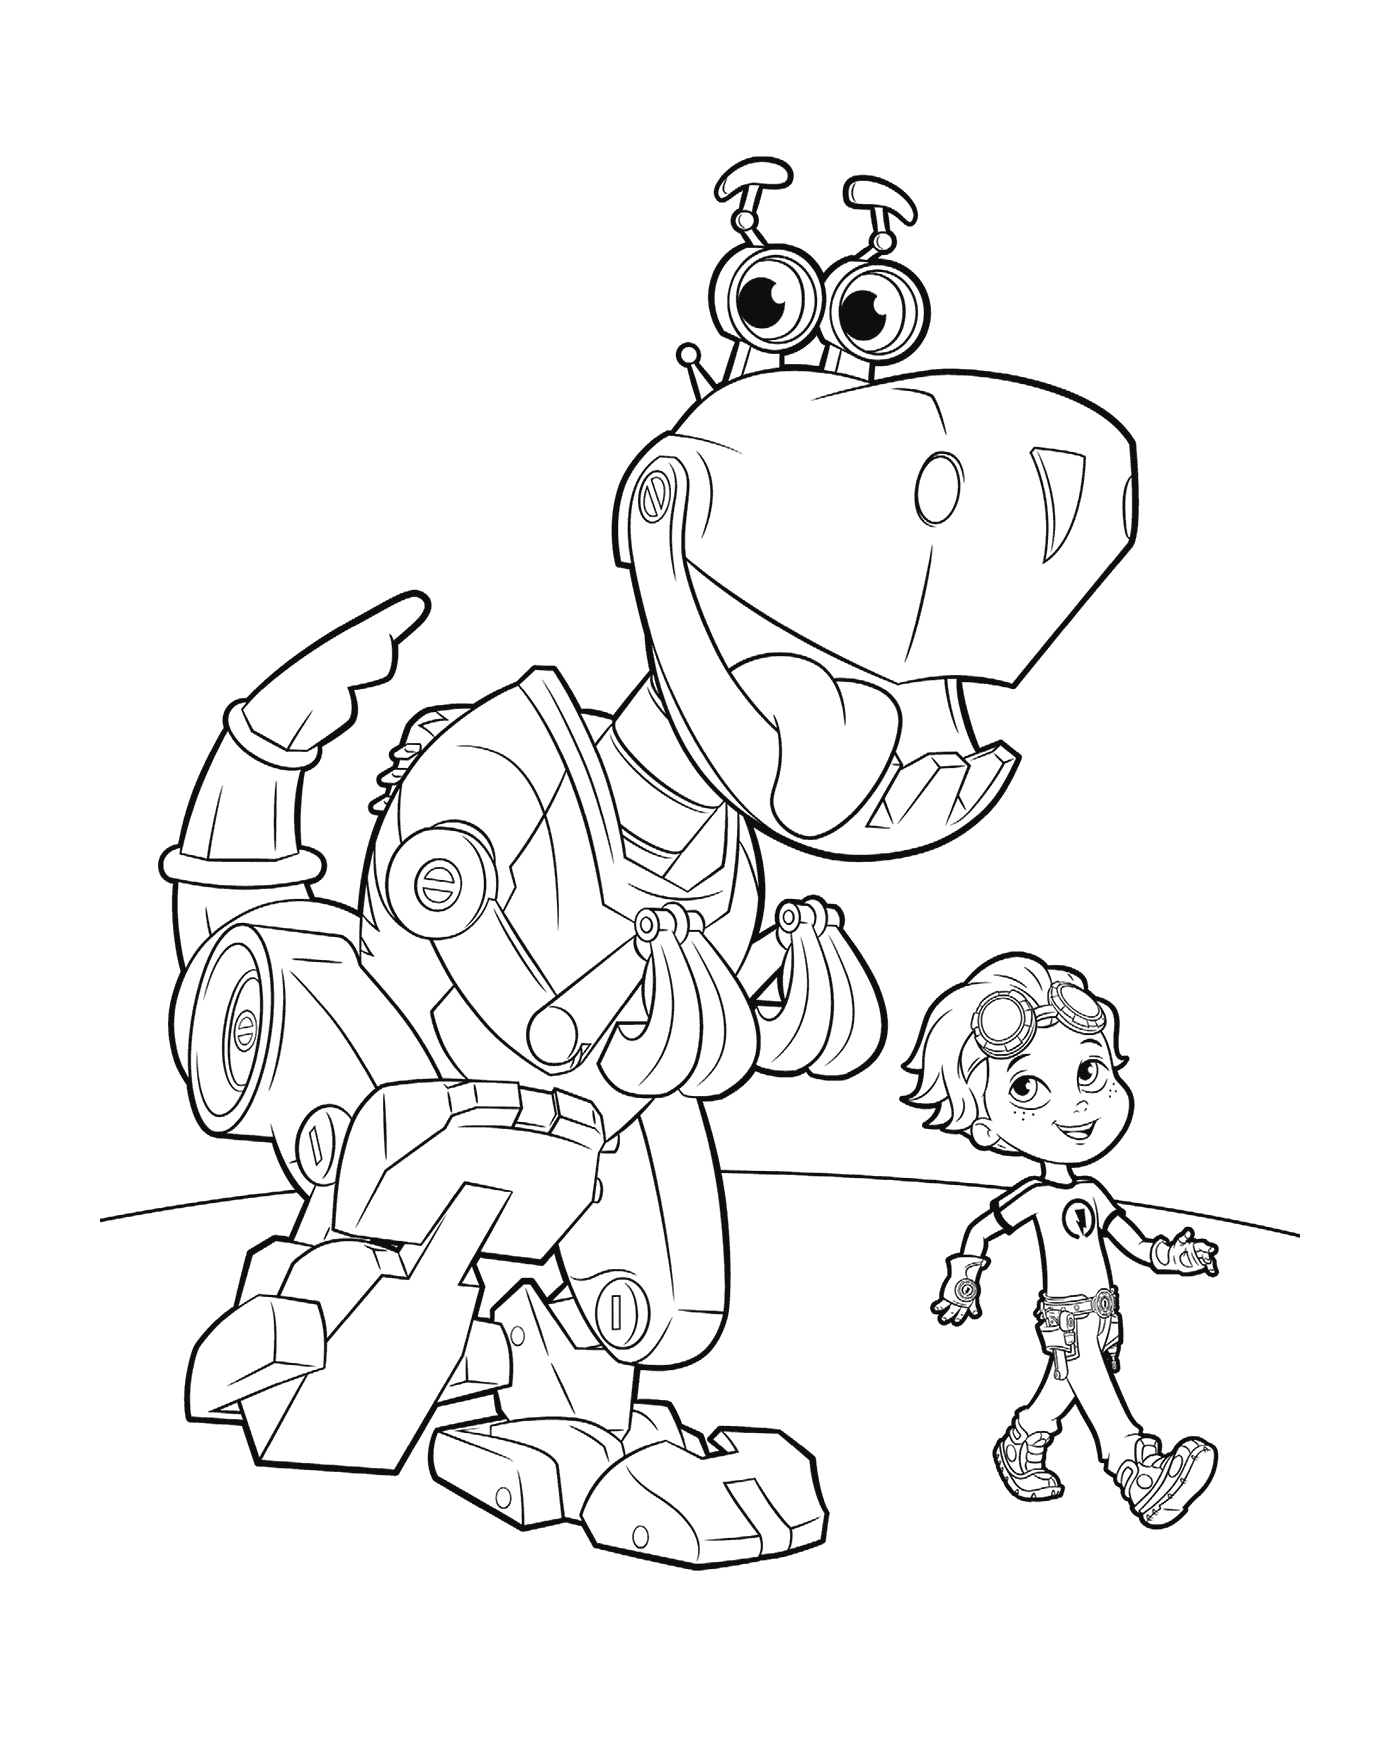  Boy and robot of Rusty Rivets 